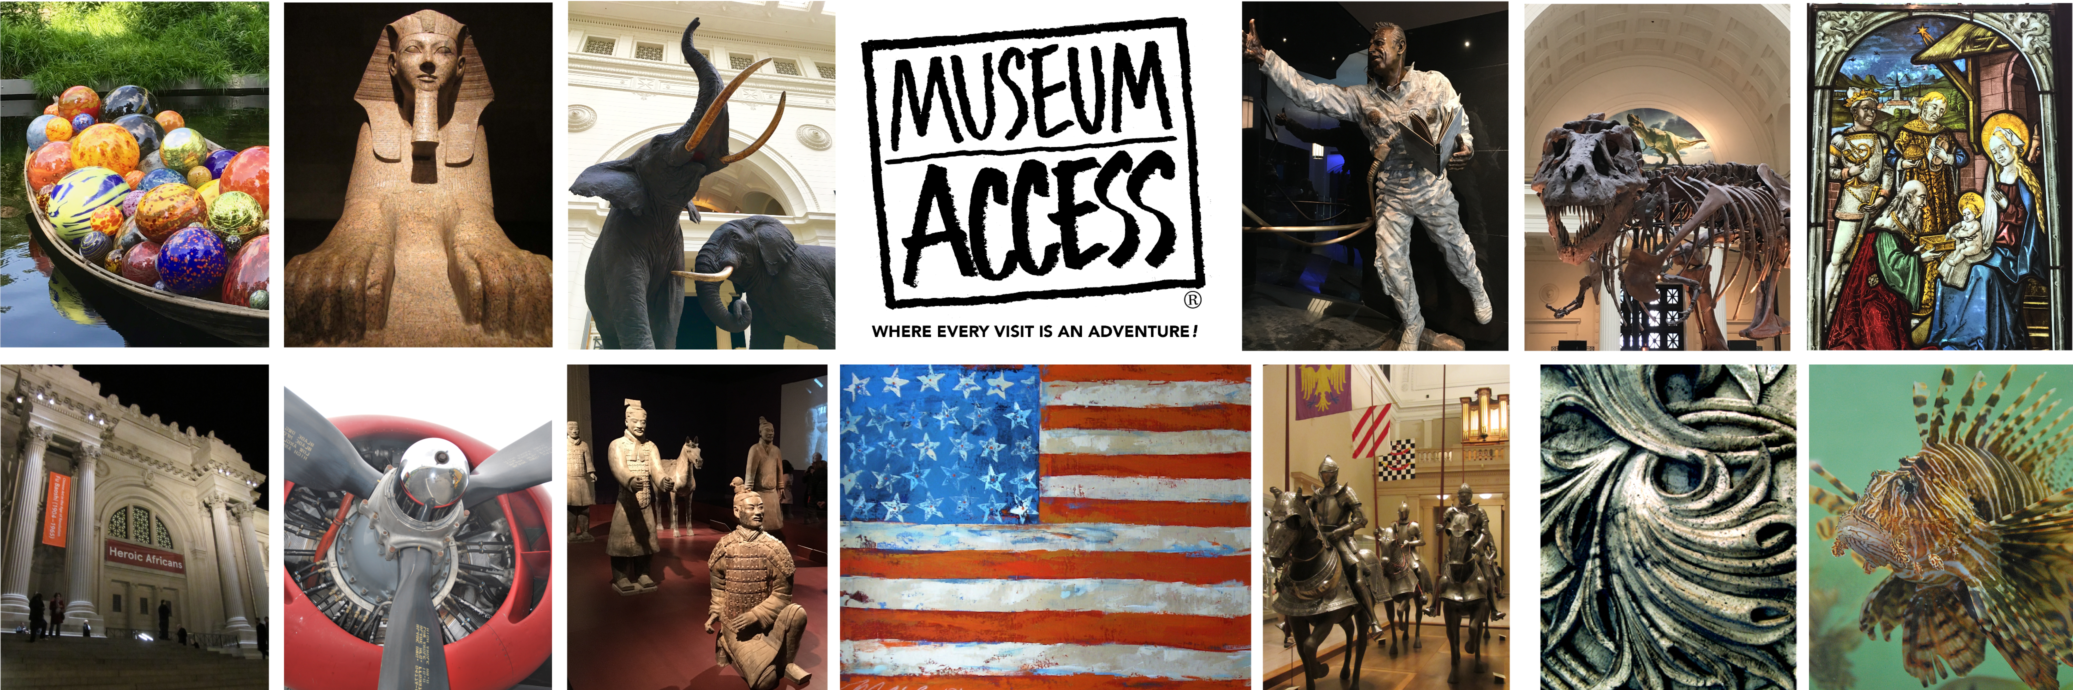 About Museum Access Header